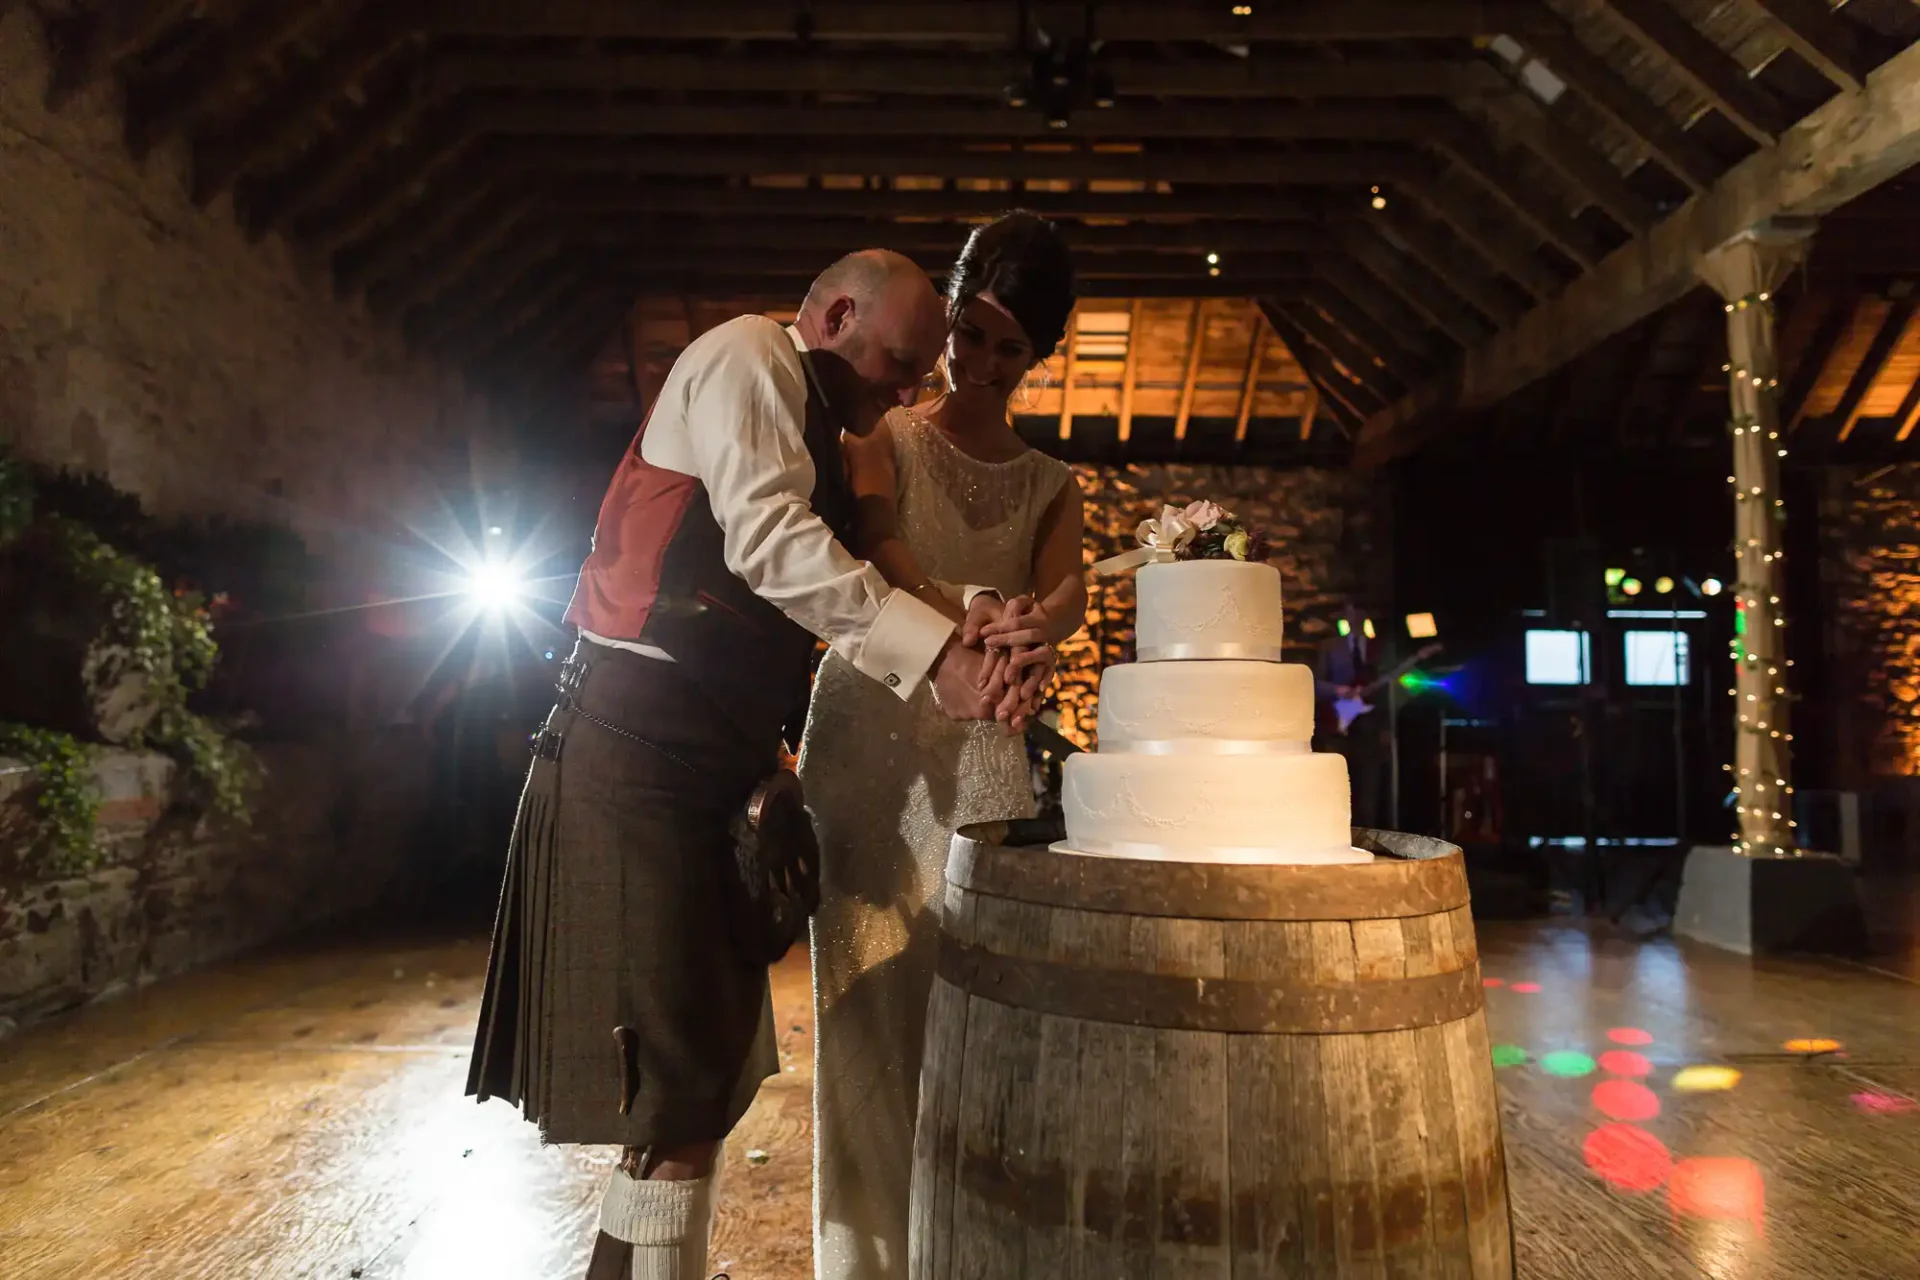 A bride and groom in formal attire cut a wedding cake together in a rustic barn venue, with warm lighting and a lens flare.